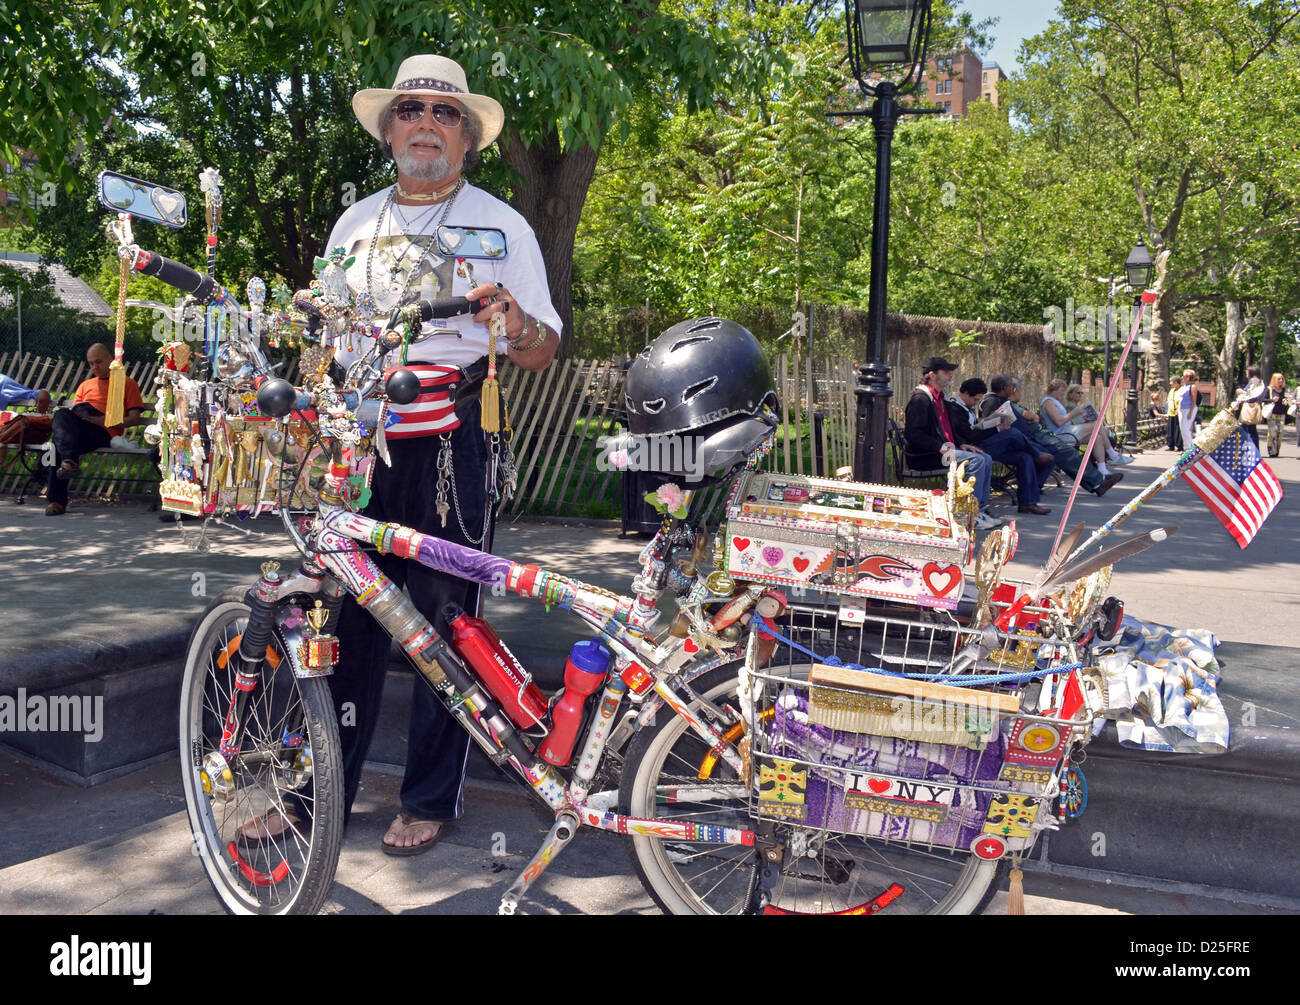 Portrait of Hector and his decorated bicycle. Washington Square Park Greenwich Village New York City Stock Photo